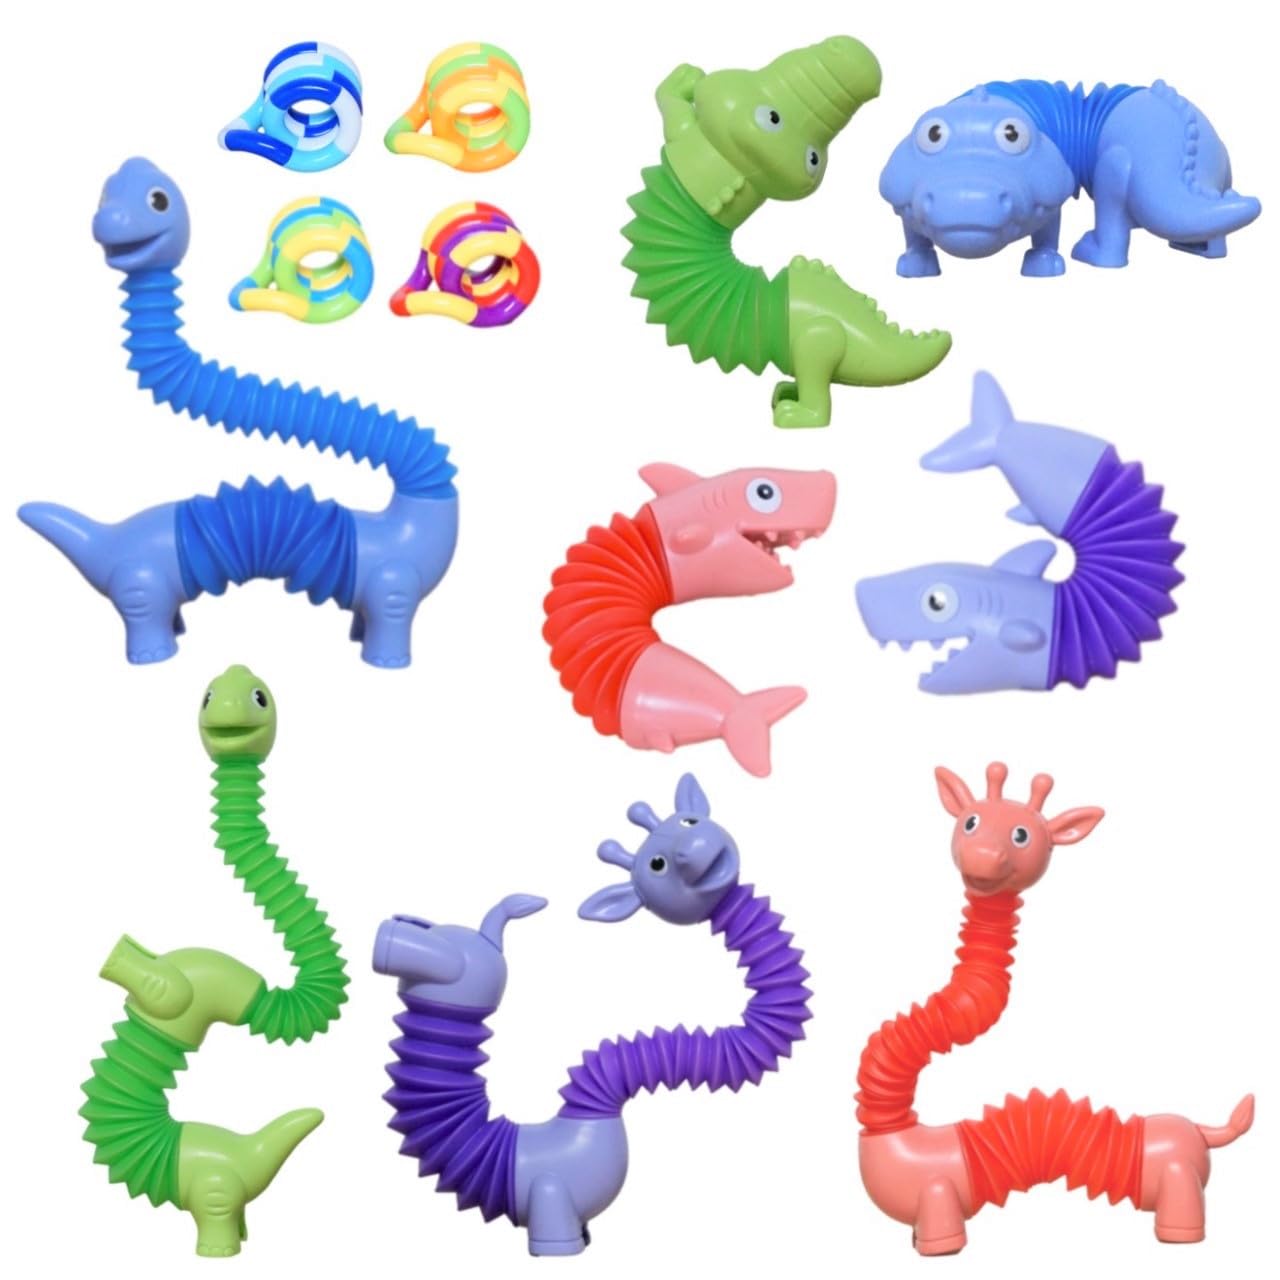 Animal Fidget Toys Bulk – Pack of 8 Pop Tubes Animal Toys and 4 Twist Chain Spinner Fidget Tubes – Cute and Attractive – Stress Relief Toys – Sensory Toys for Toddlers, Kids, and Adults